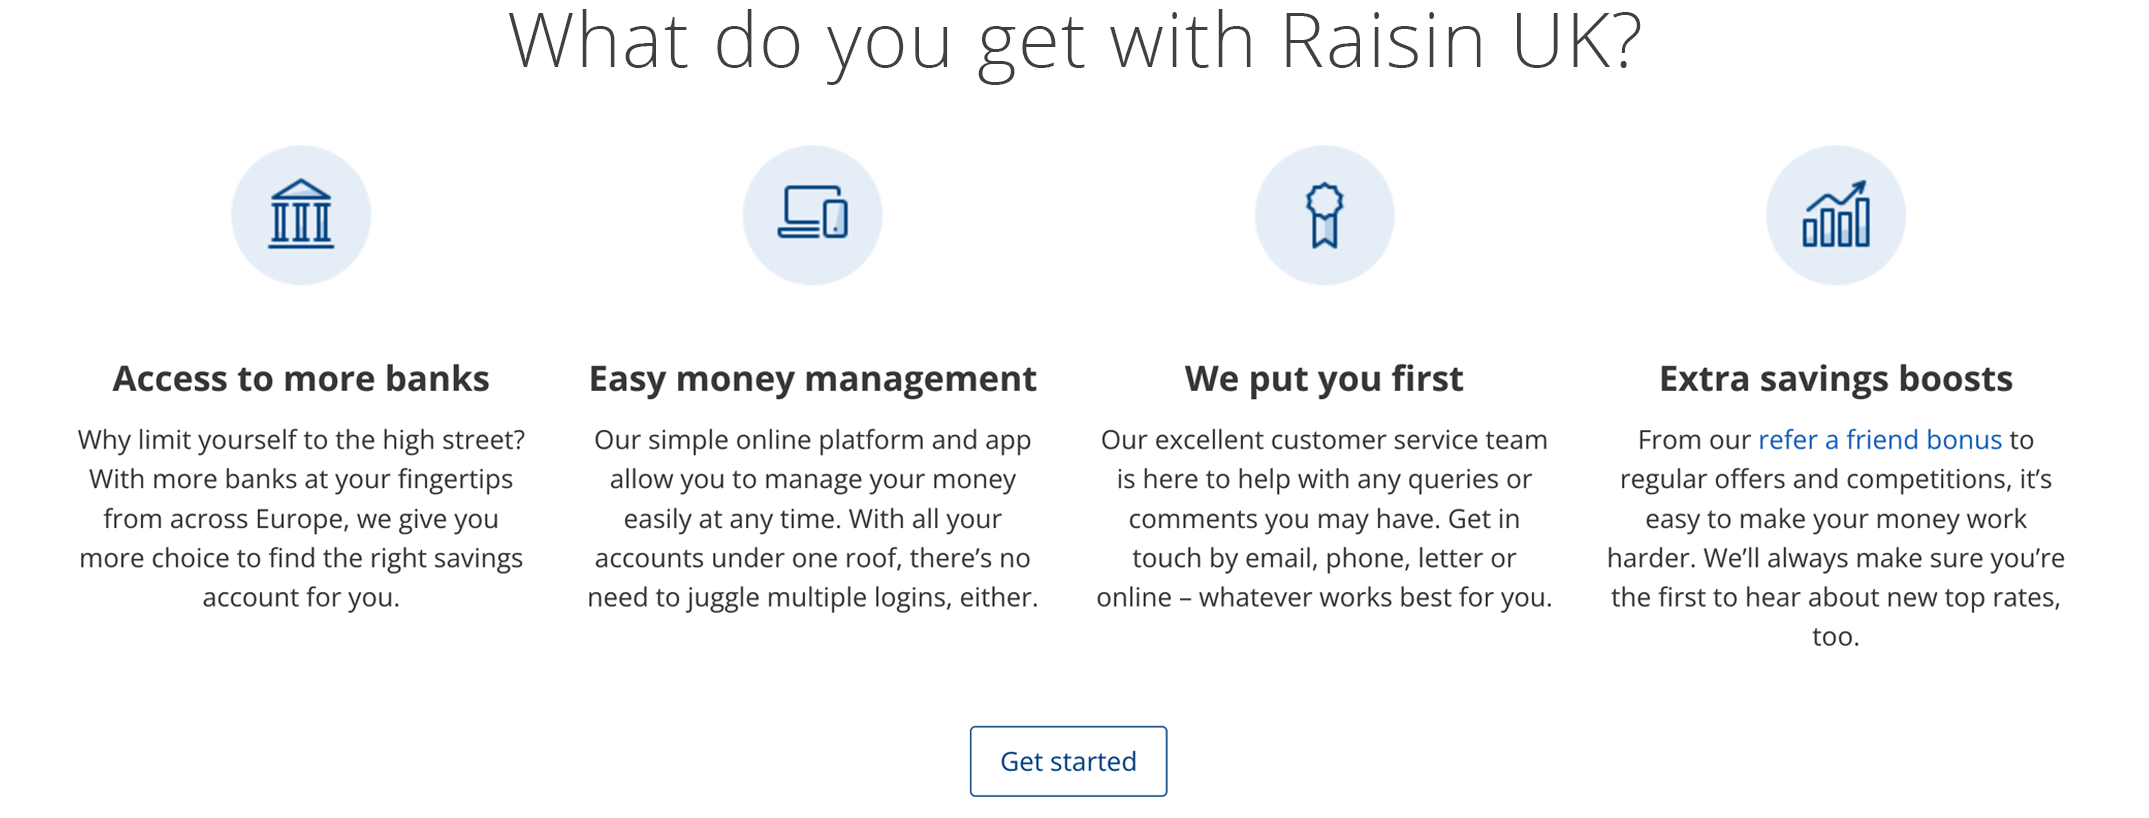 What do you get with Raisin UK?